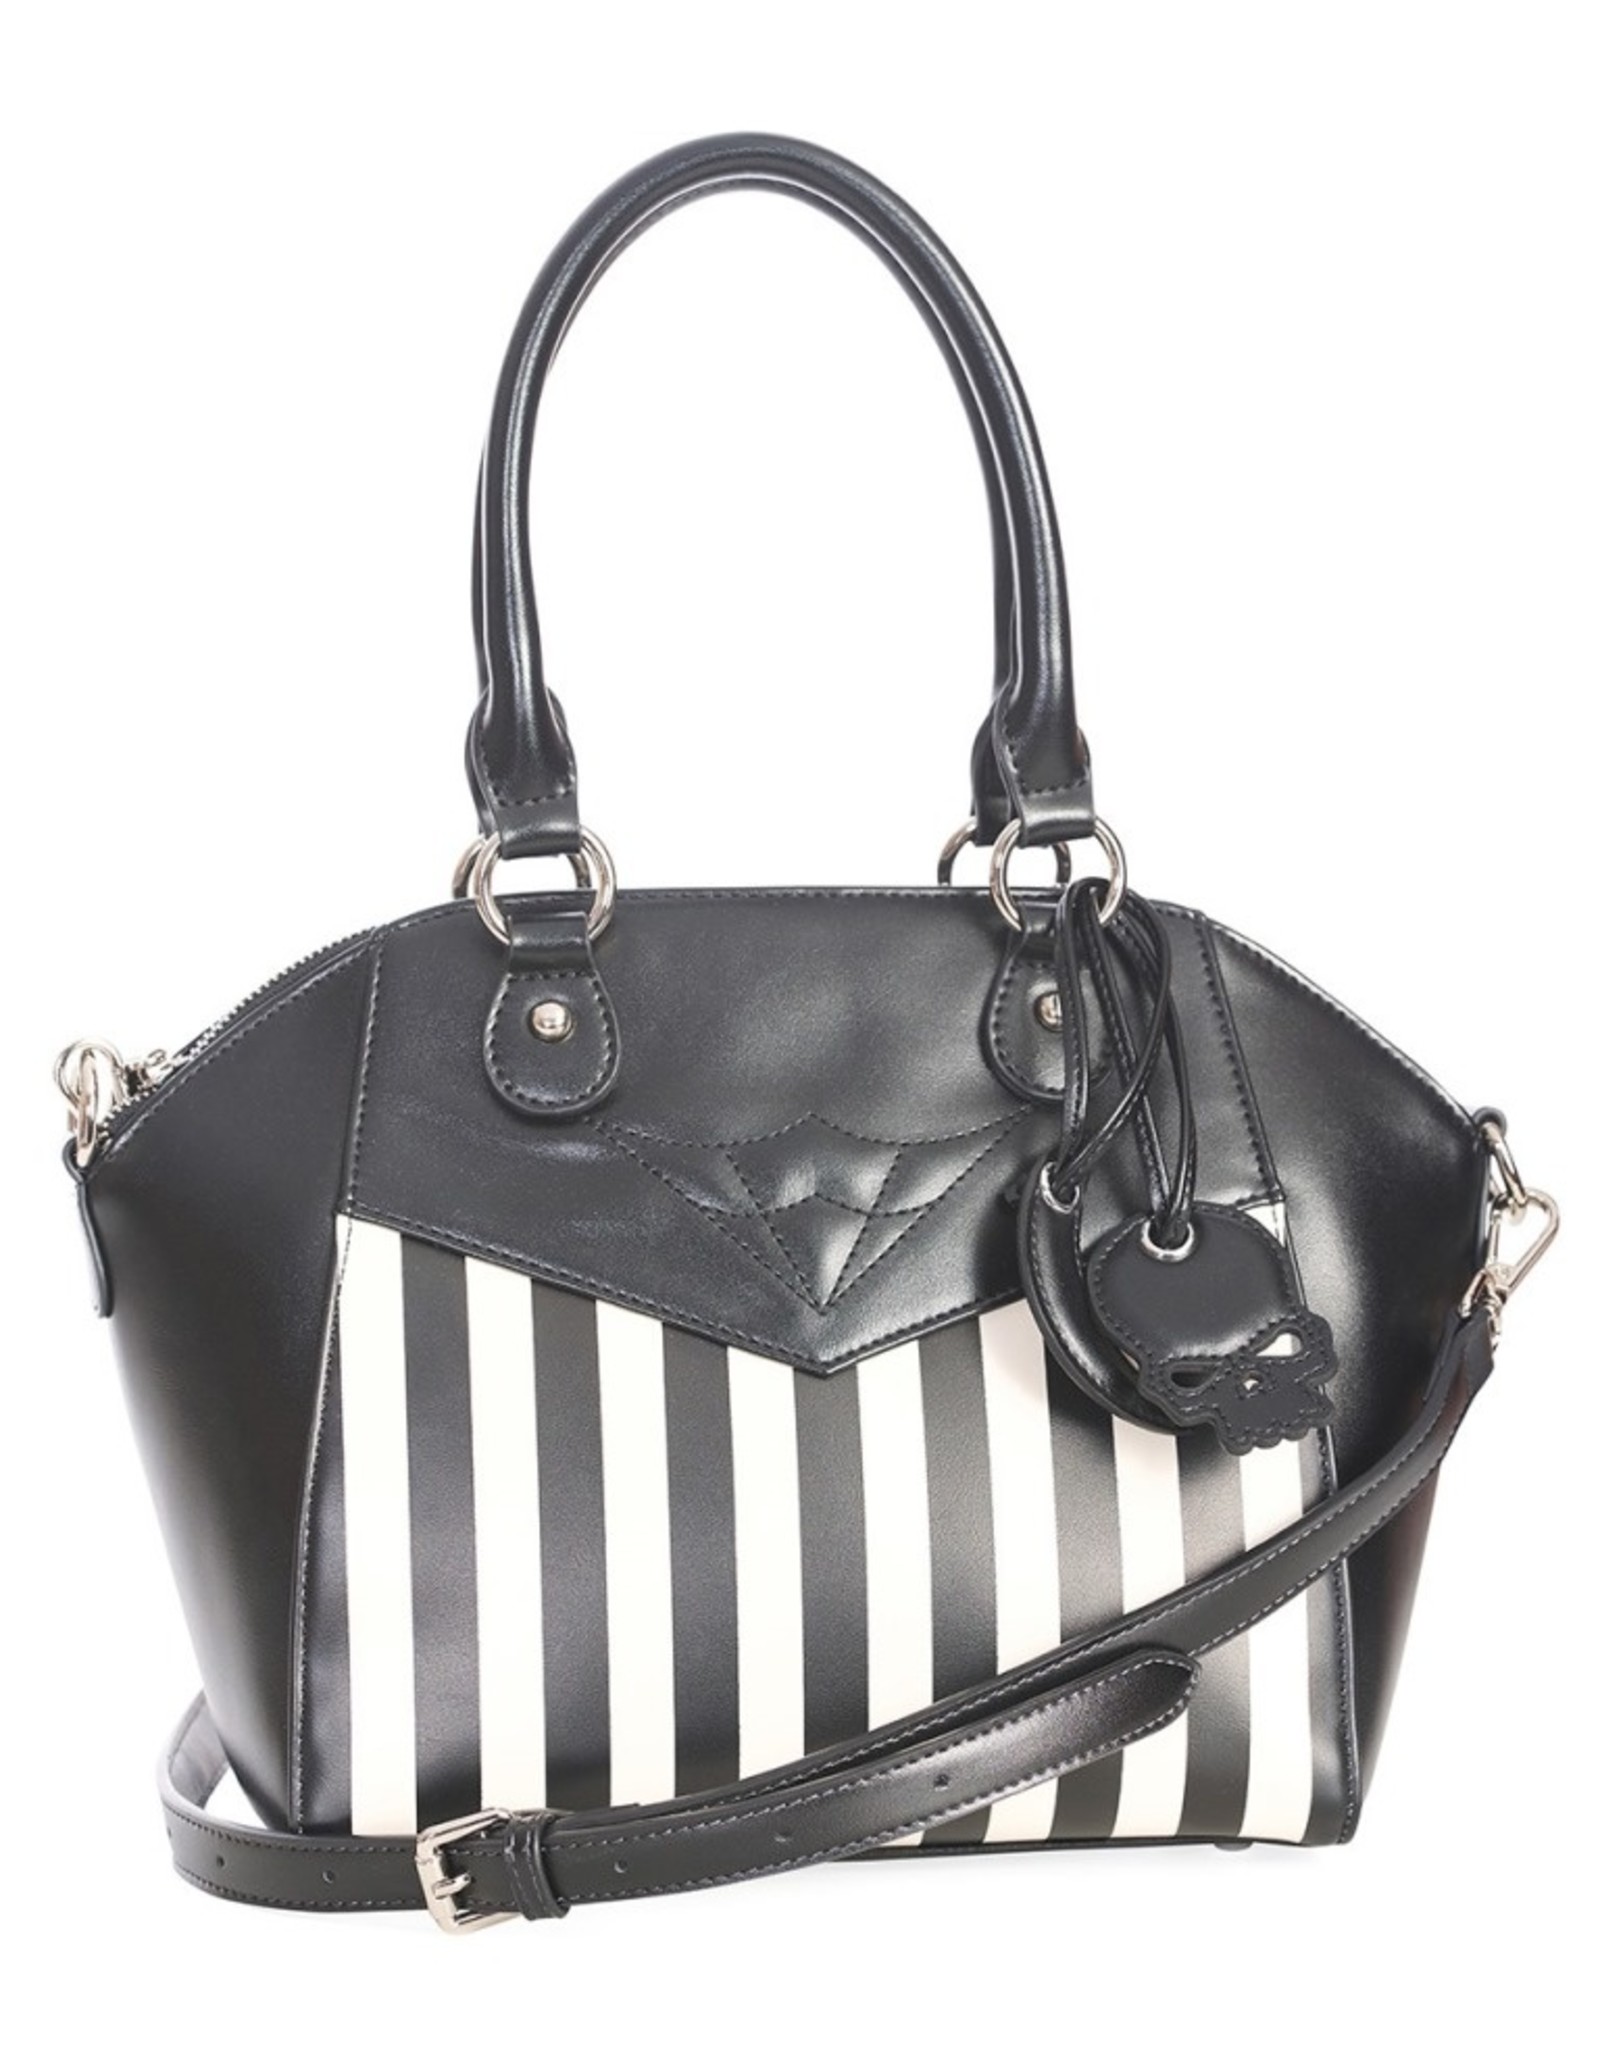 Banned Gothic bags Steampunk bags - Banned Another Lost Soul Striped Handbag